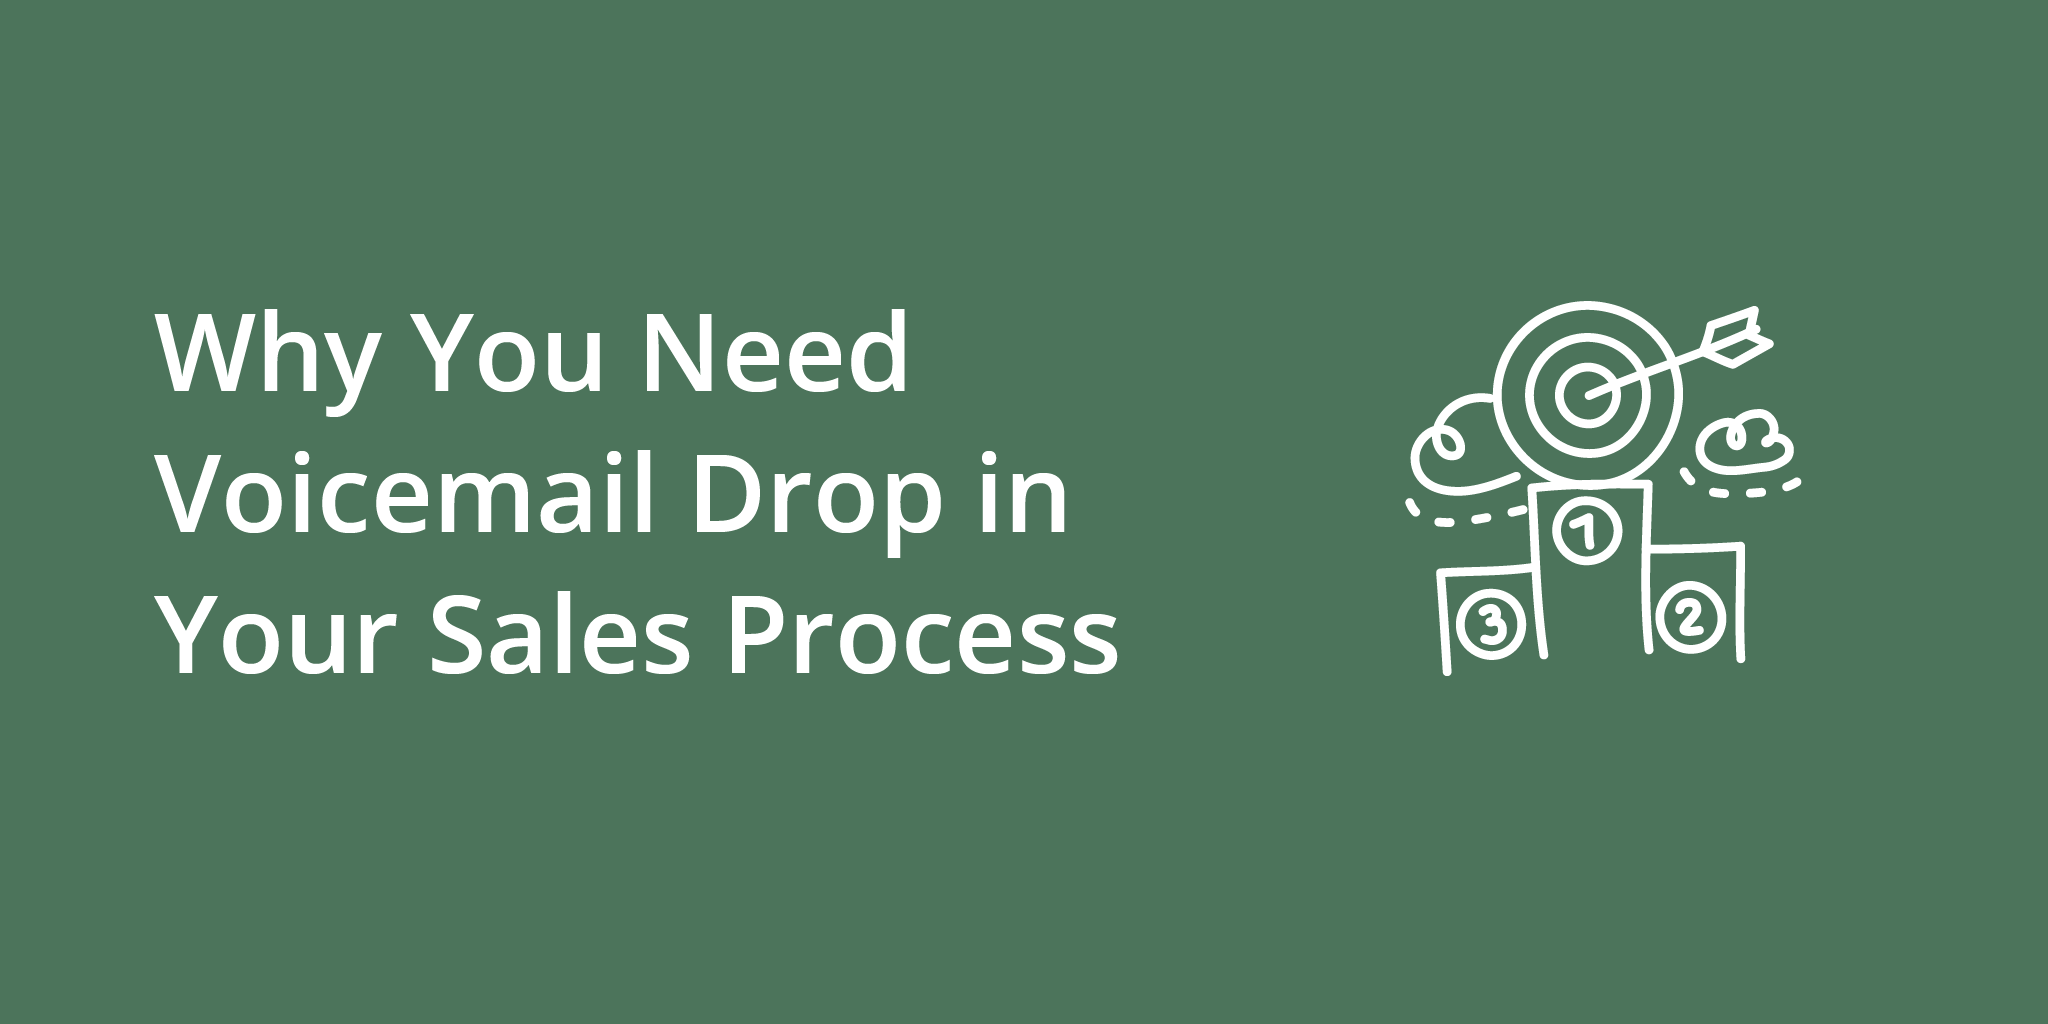 /assets/img/uploads/articles/why-you-need-voicemail-drop-in-your-sales-process_sales-cadence-blog-header.png